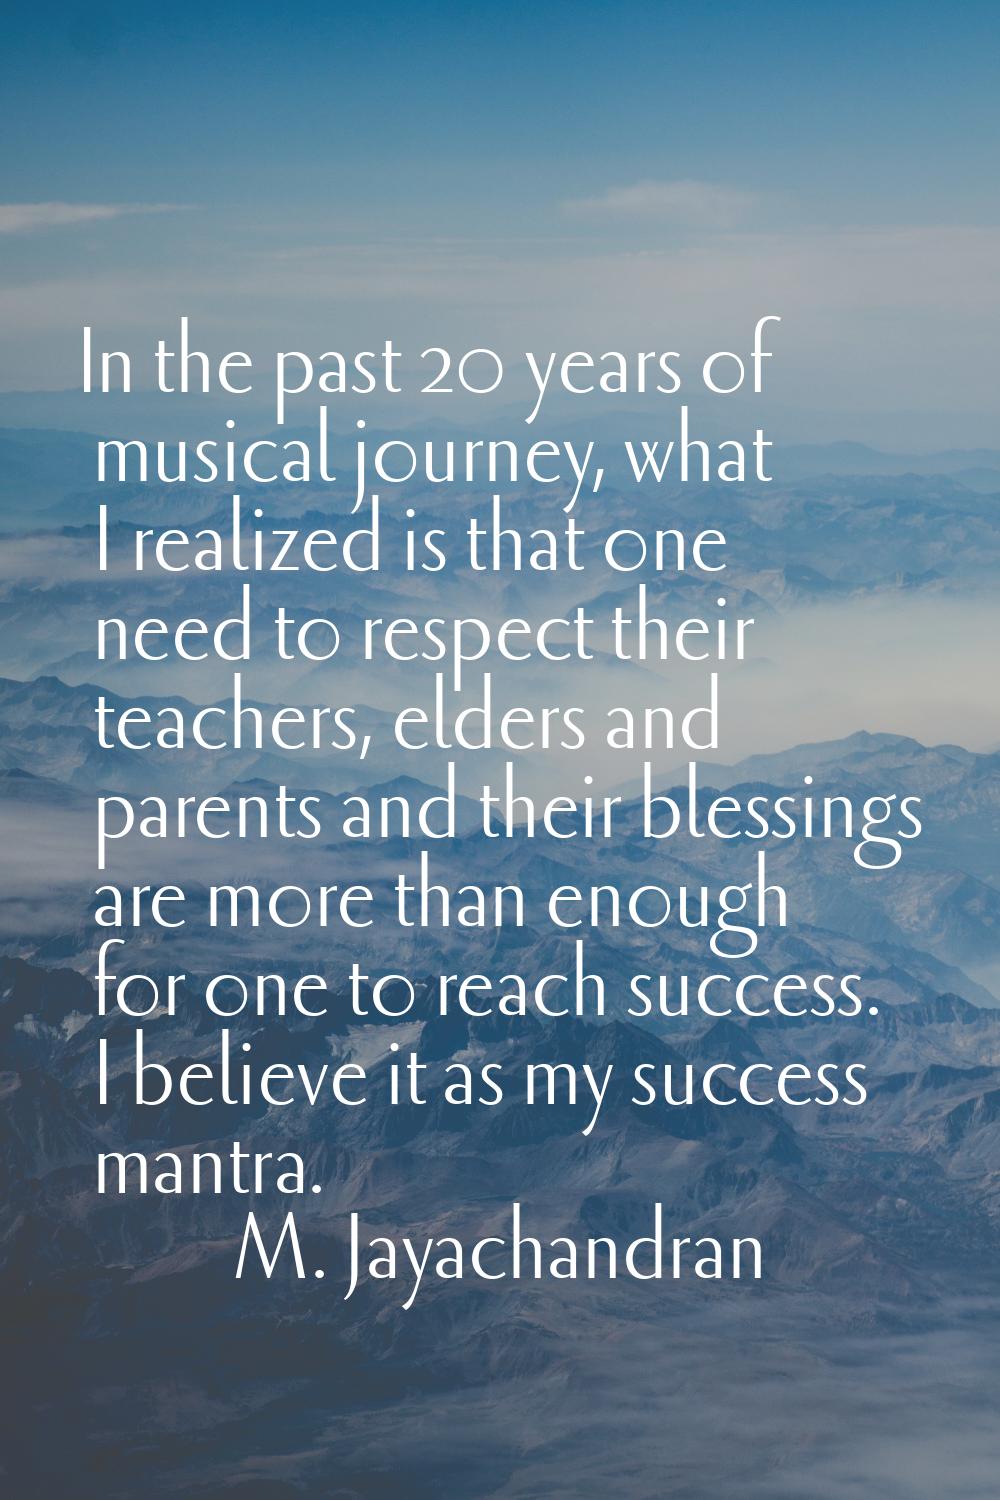 In the past 20 years of musical journey, what I realized is that one need to respect their teachers